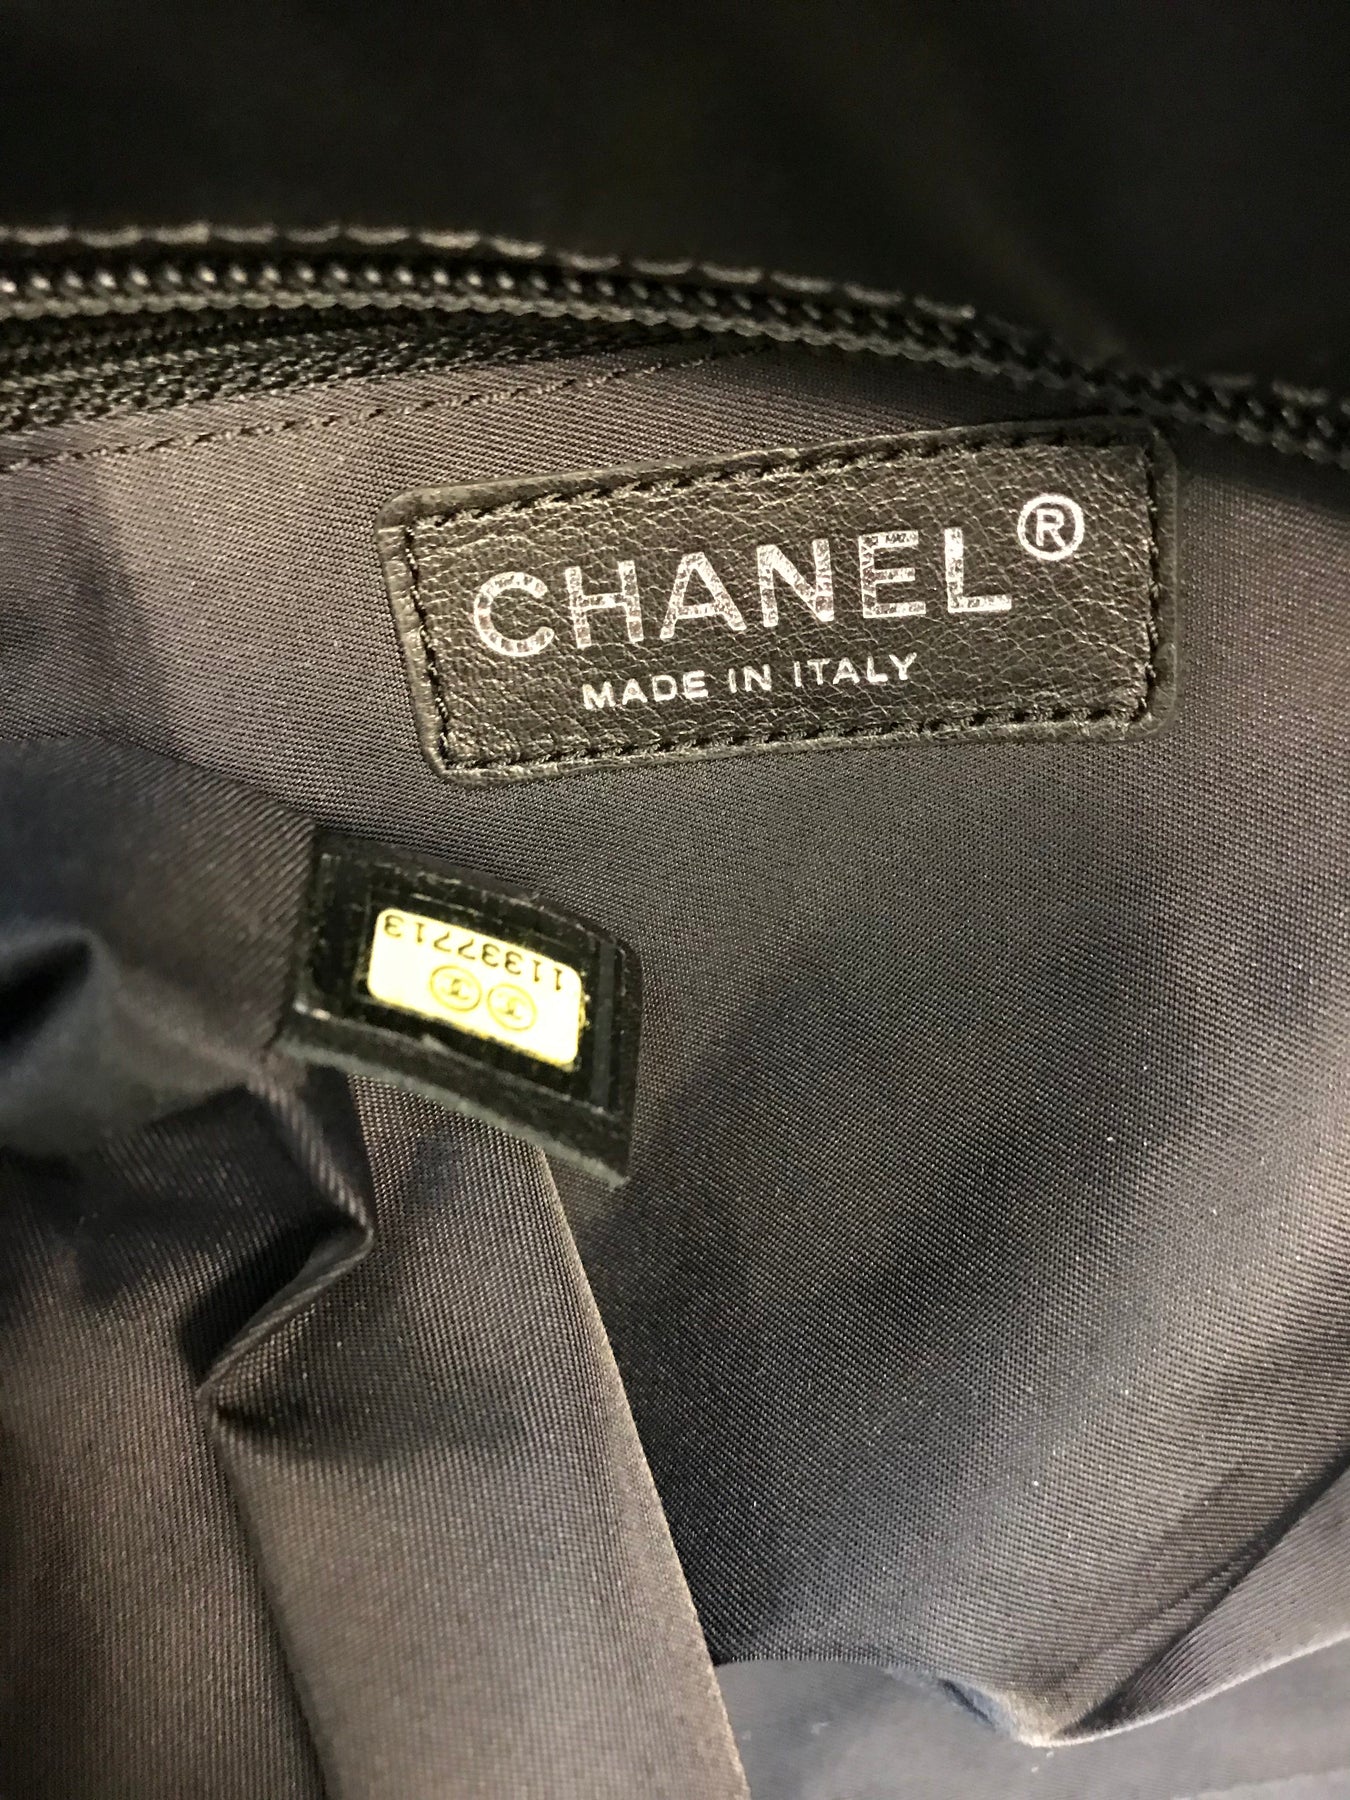 Chanel Quilted Coated Canvas Paris Biarritz Weekender Travel Bag